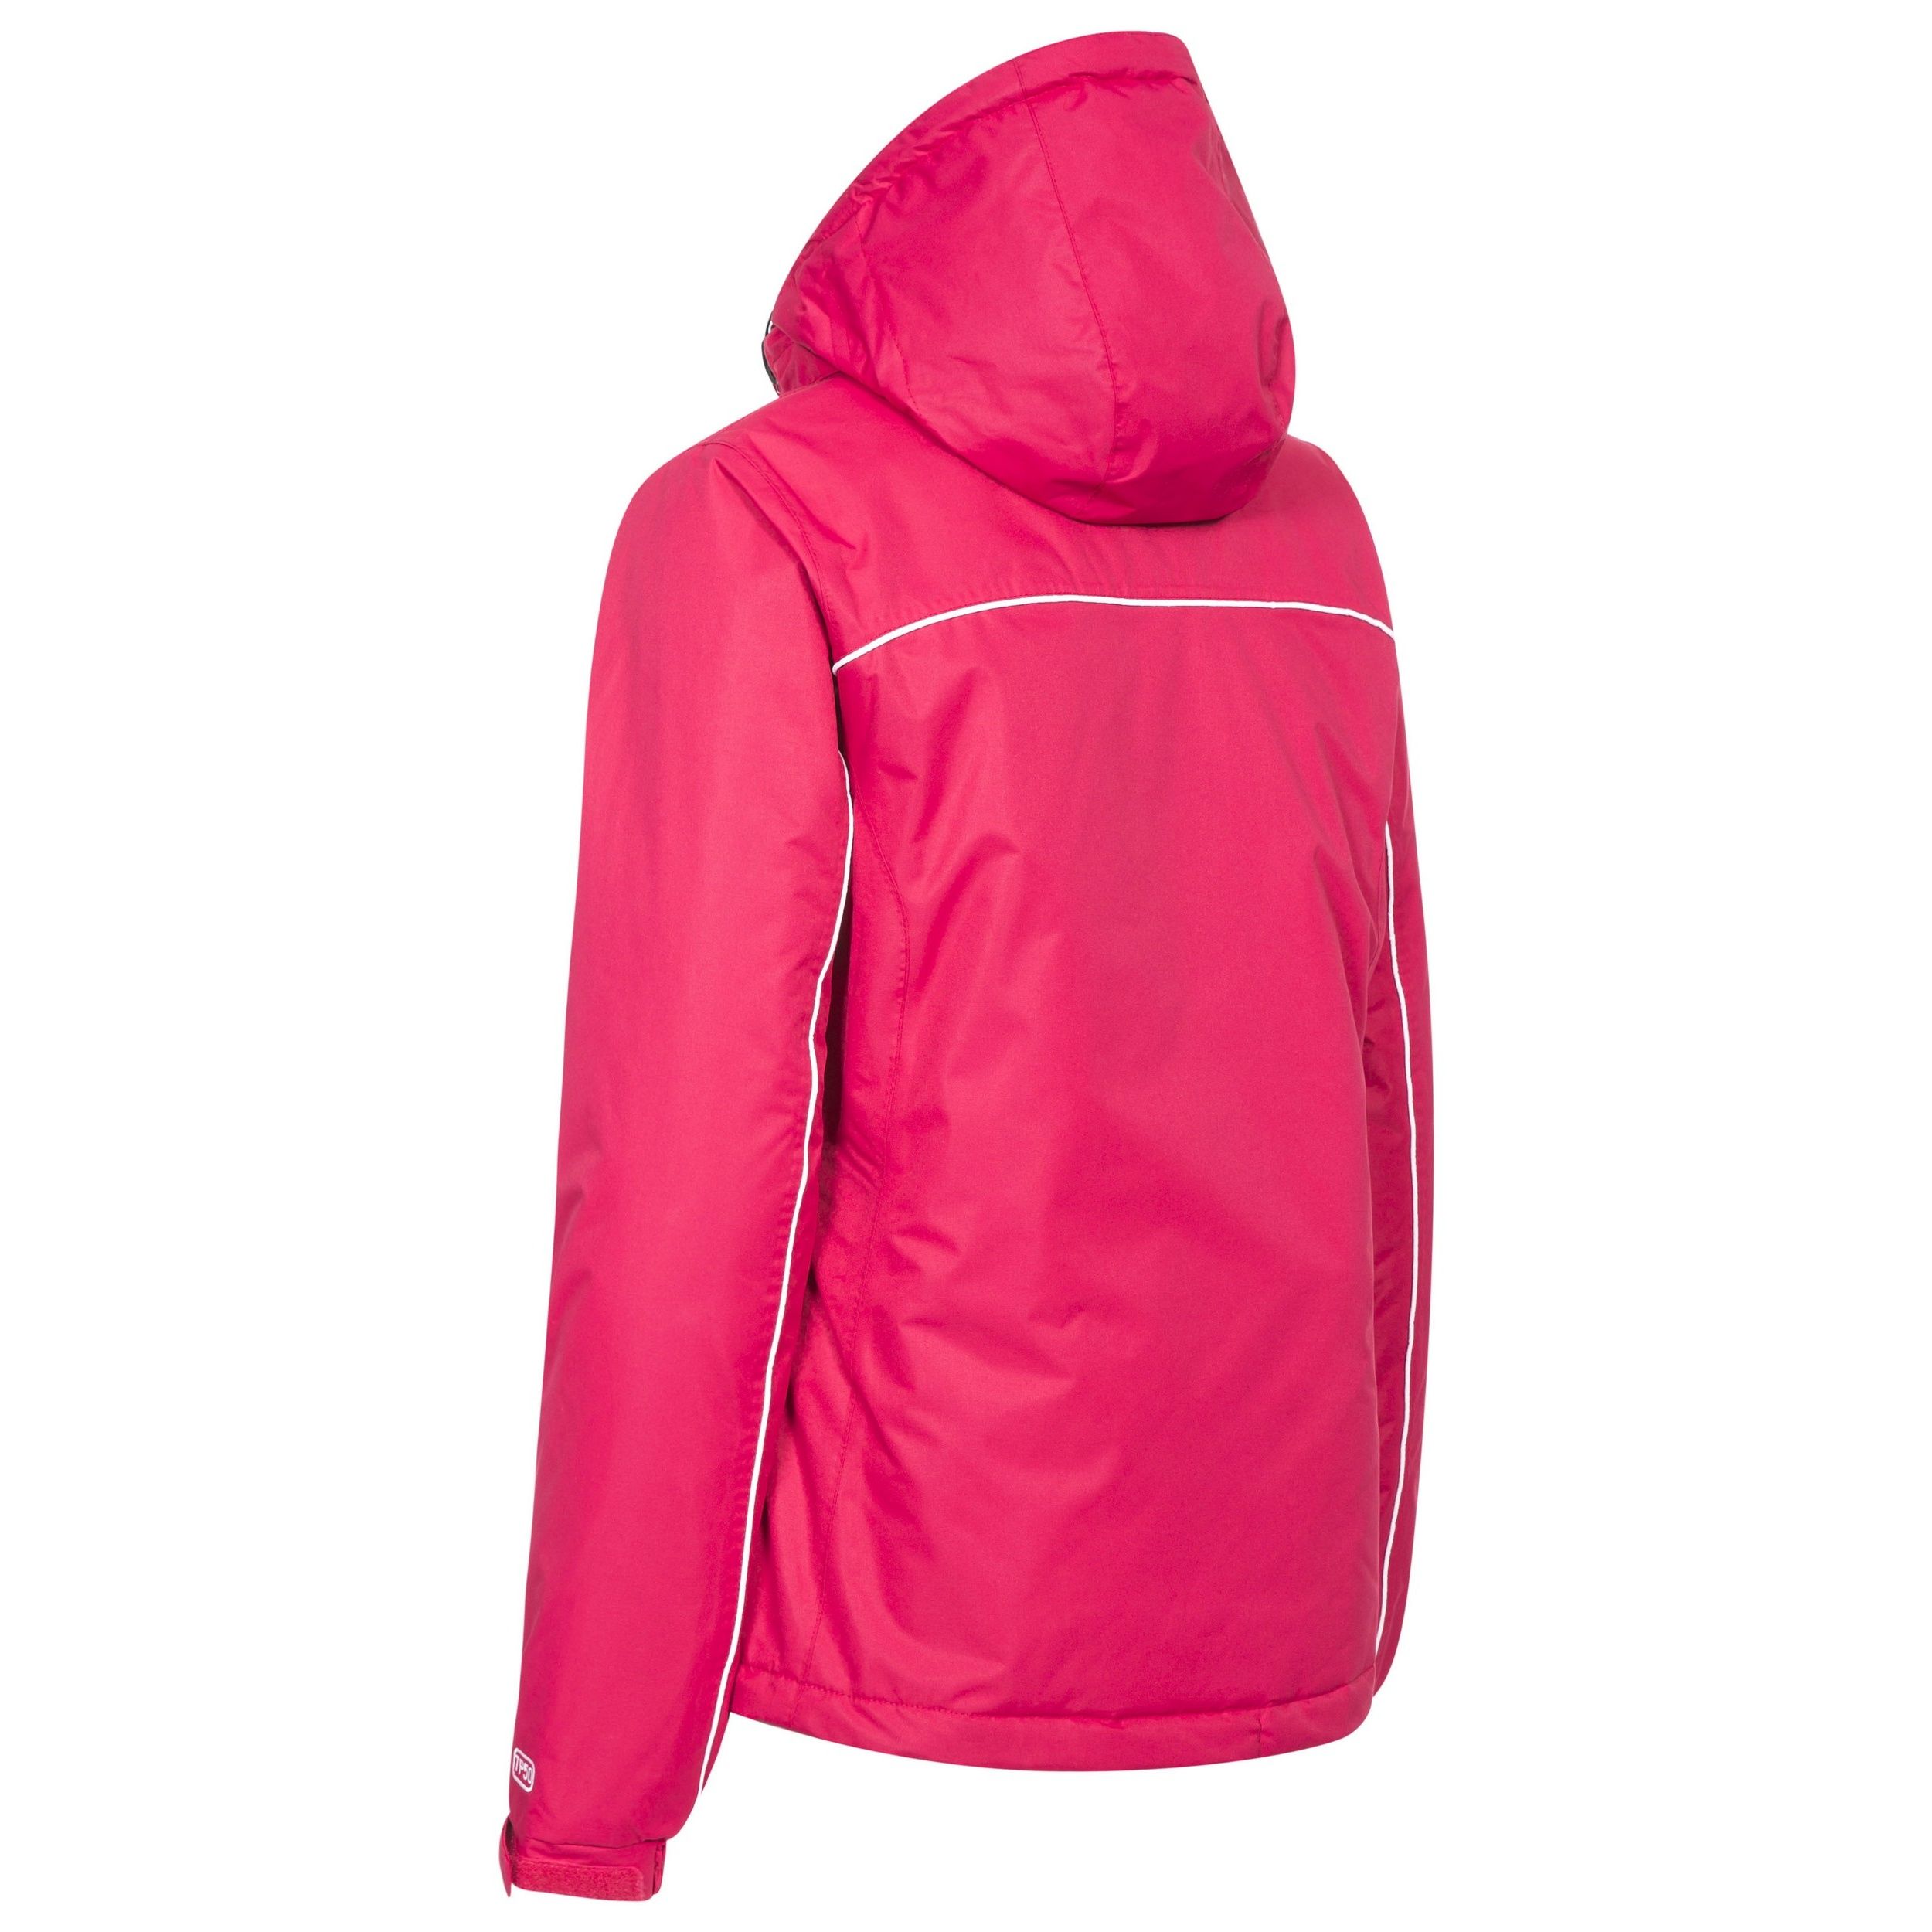 Detachable Stud Off Hood. 2 Zip Pockets. 1 Sleeve Pocket. Inner Snowbreak. Elasticated Cuffs with Adjustable Tabs. Hem Drawcord. Shell: 100% Polyester PU Coating. Lining: 100% Polyester. Filling: 100% Polyester. Trespass Womens Chest Sizing (approx): XS/8 - 32in/81cm, S/10 - 34in/86cm, M/12 - 36in/91.4cm, L/14 - 38in/96.5cm, XL/16 - 40in/101.5cm, XXL/18 - 42in/106.5cm.